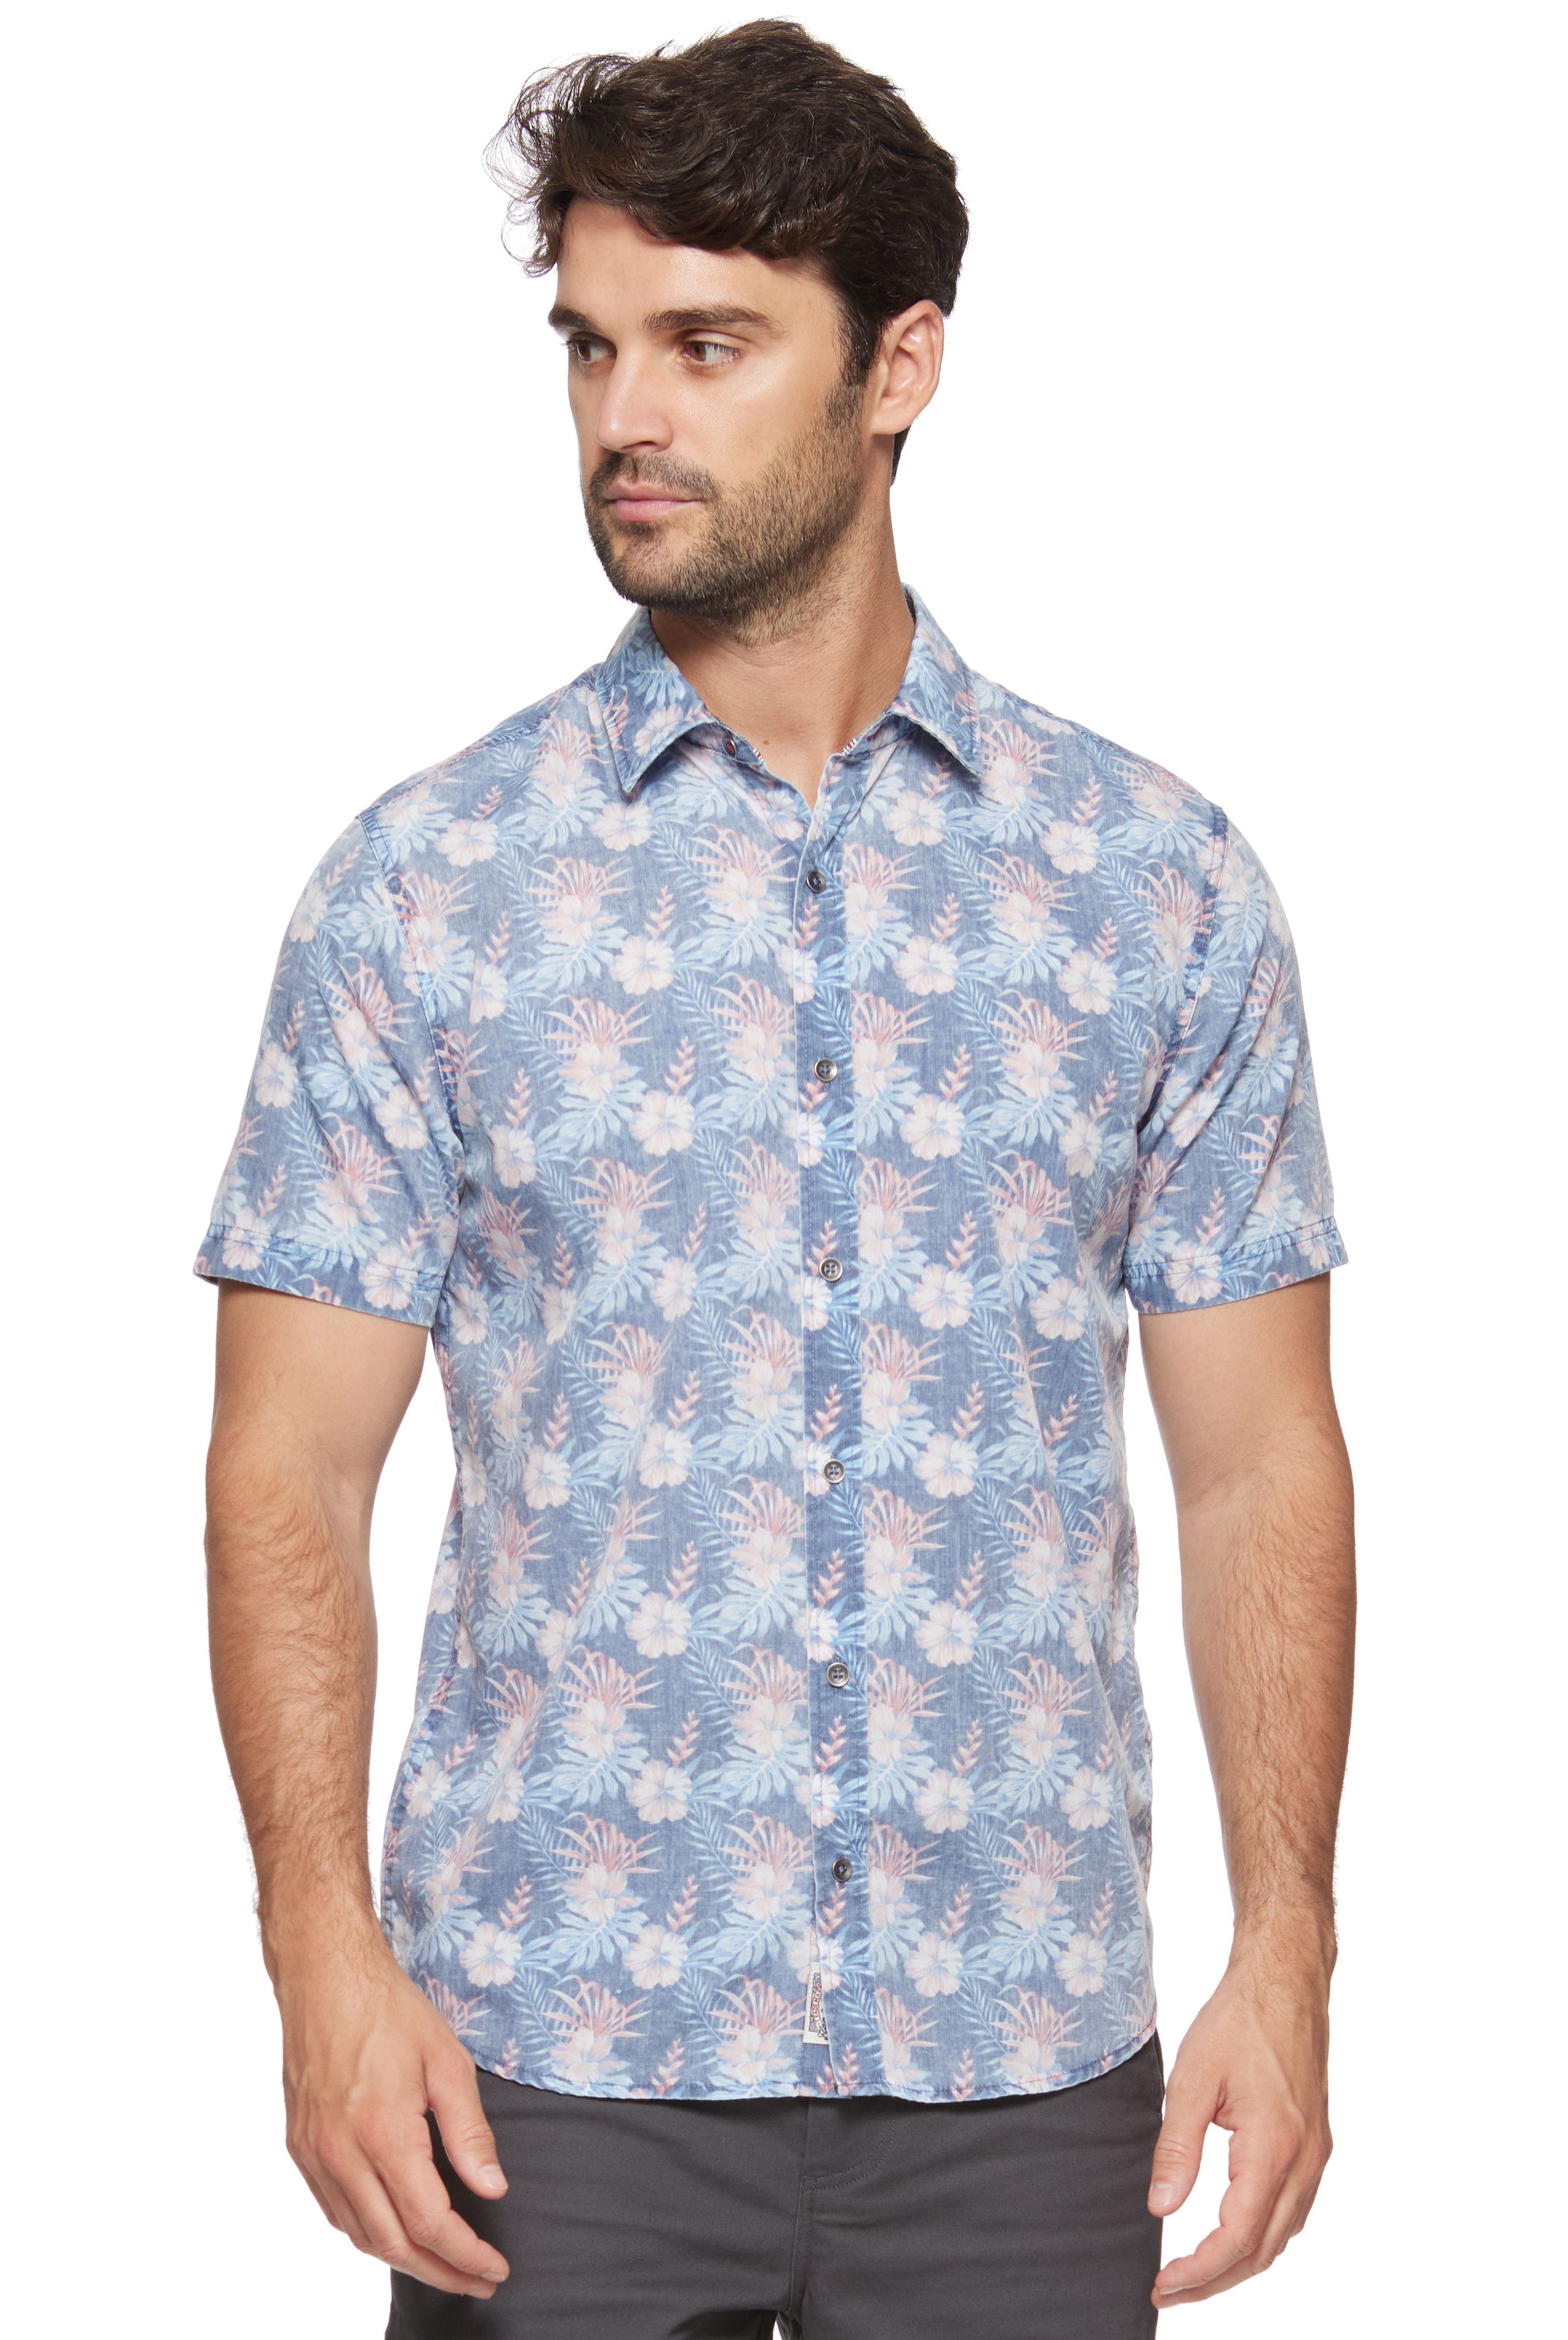 Puckett Vintage Soft Hibiscus Print Shirt-Men's Tops-Vixen Collection, Day Spa and Women's Boutique Located in Seattle, Washington